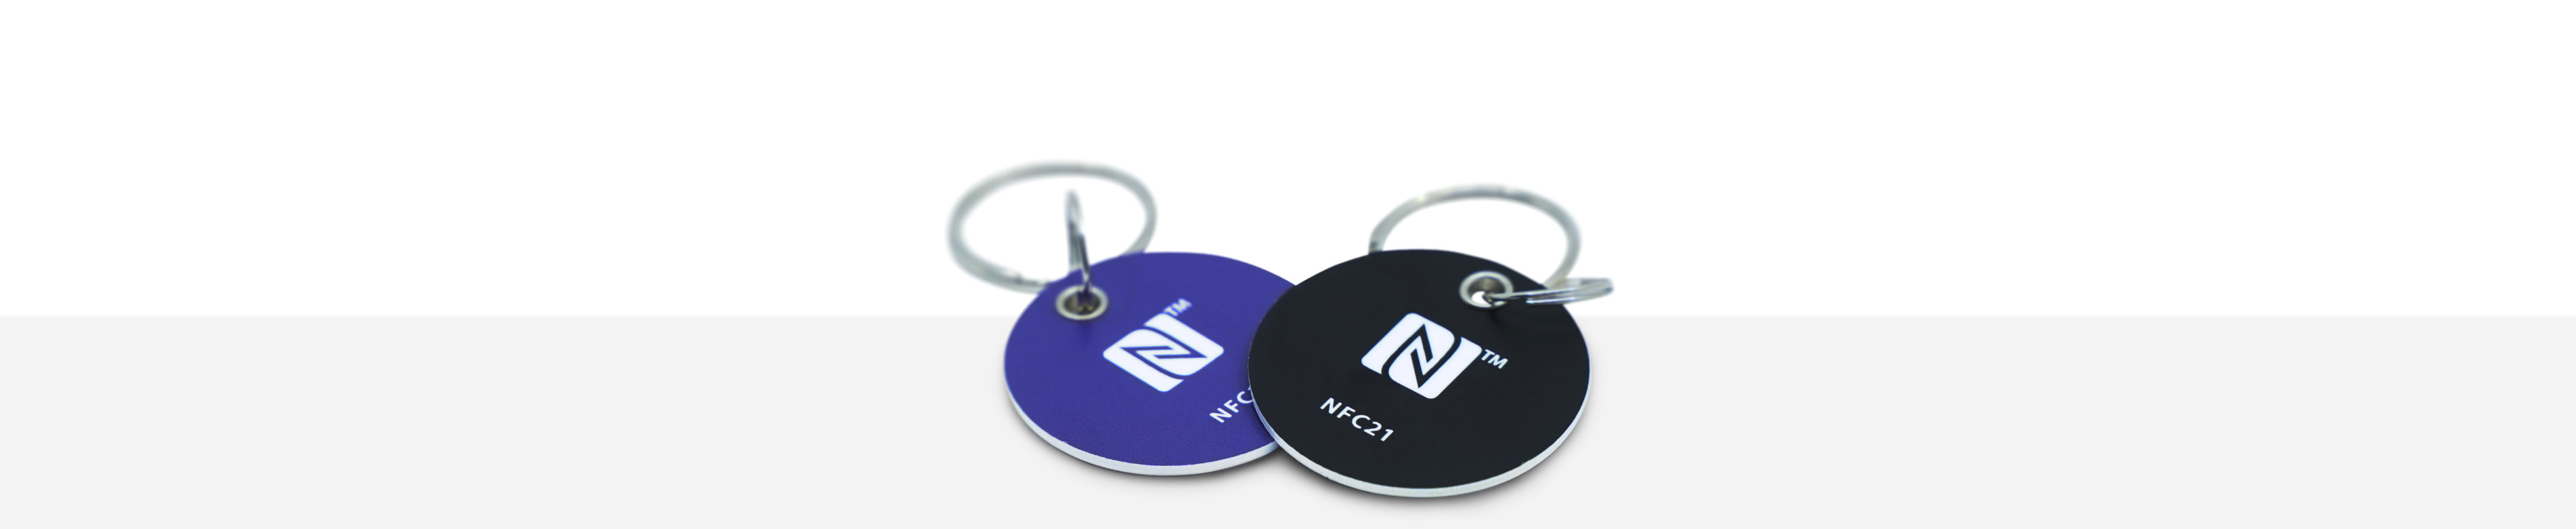 Two round PVC key fobs in black and blue